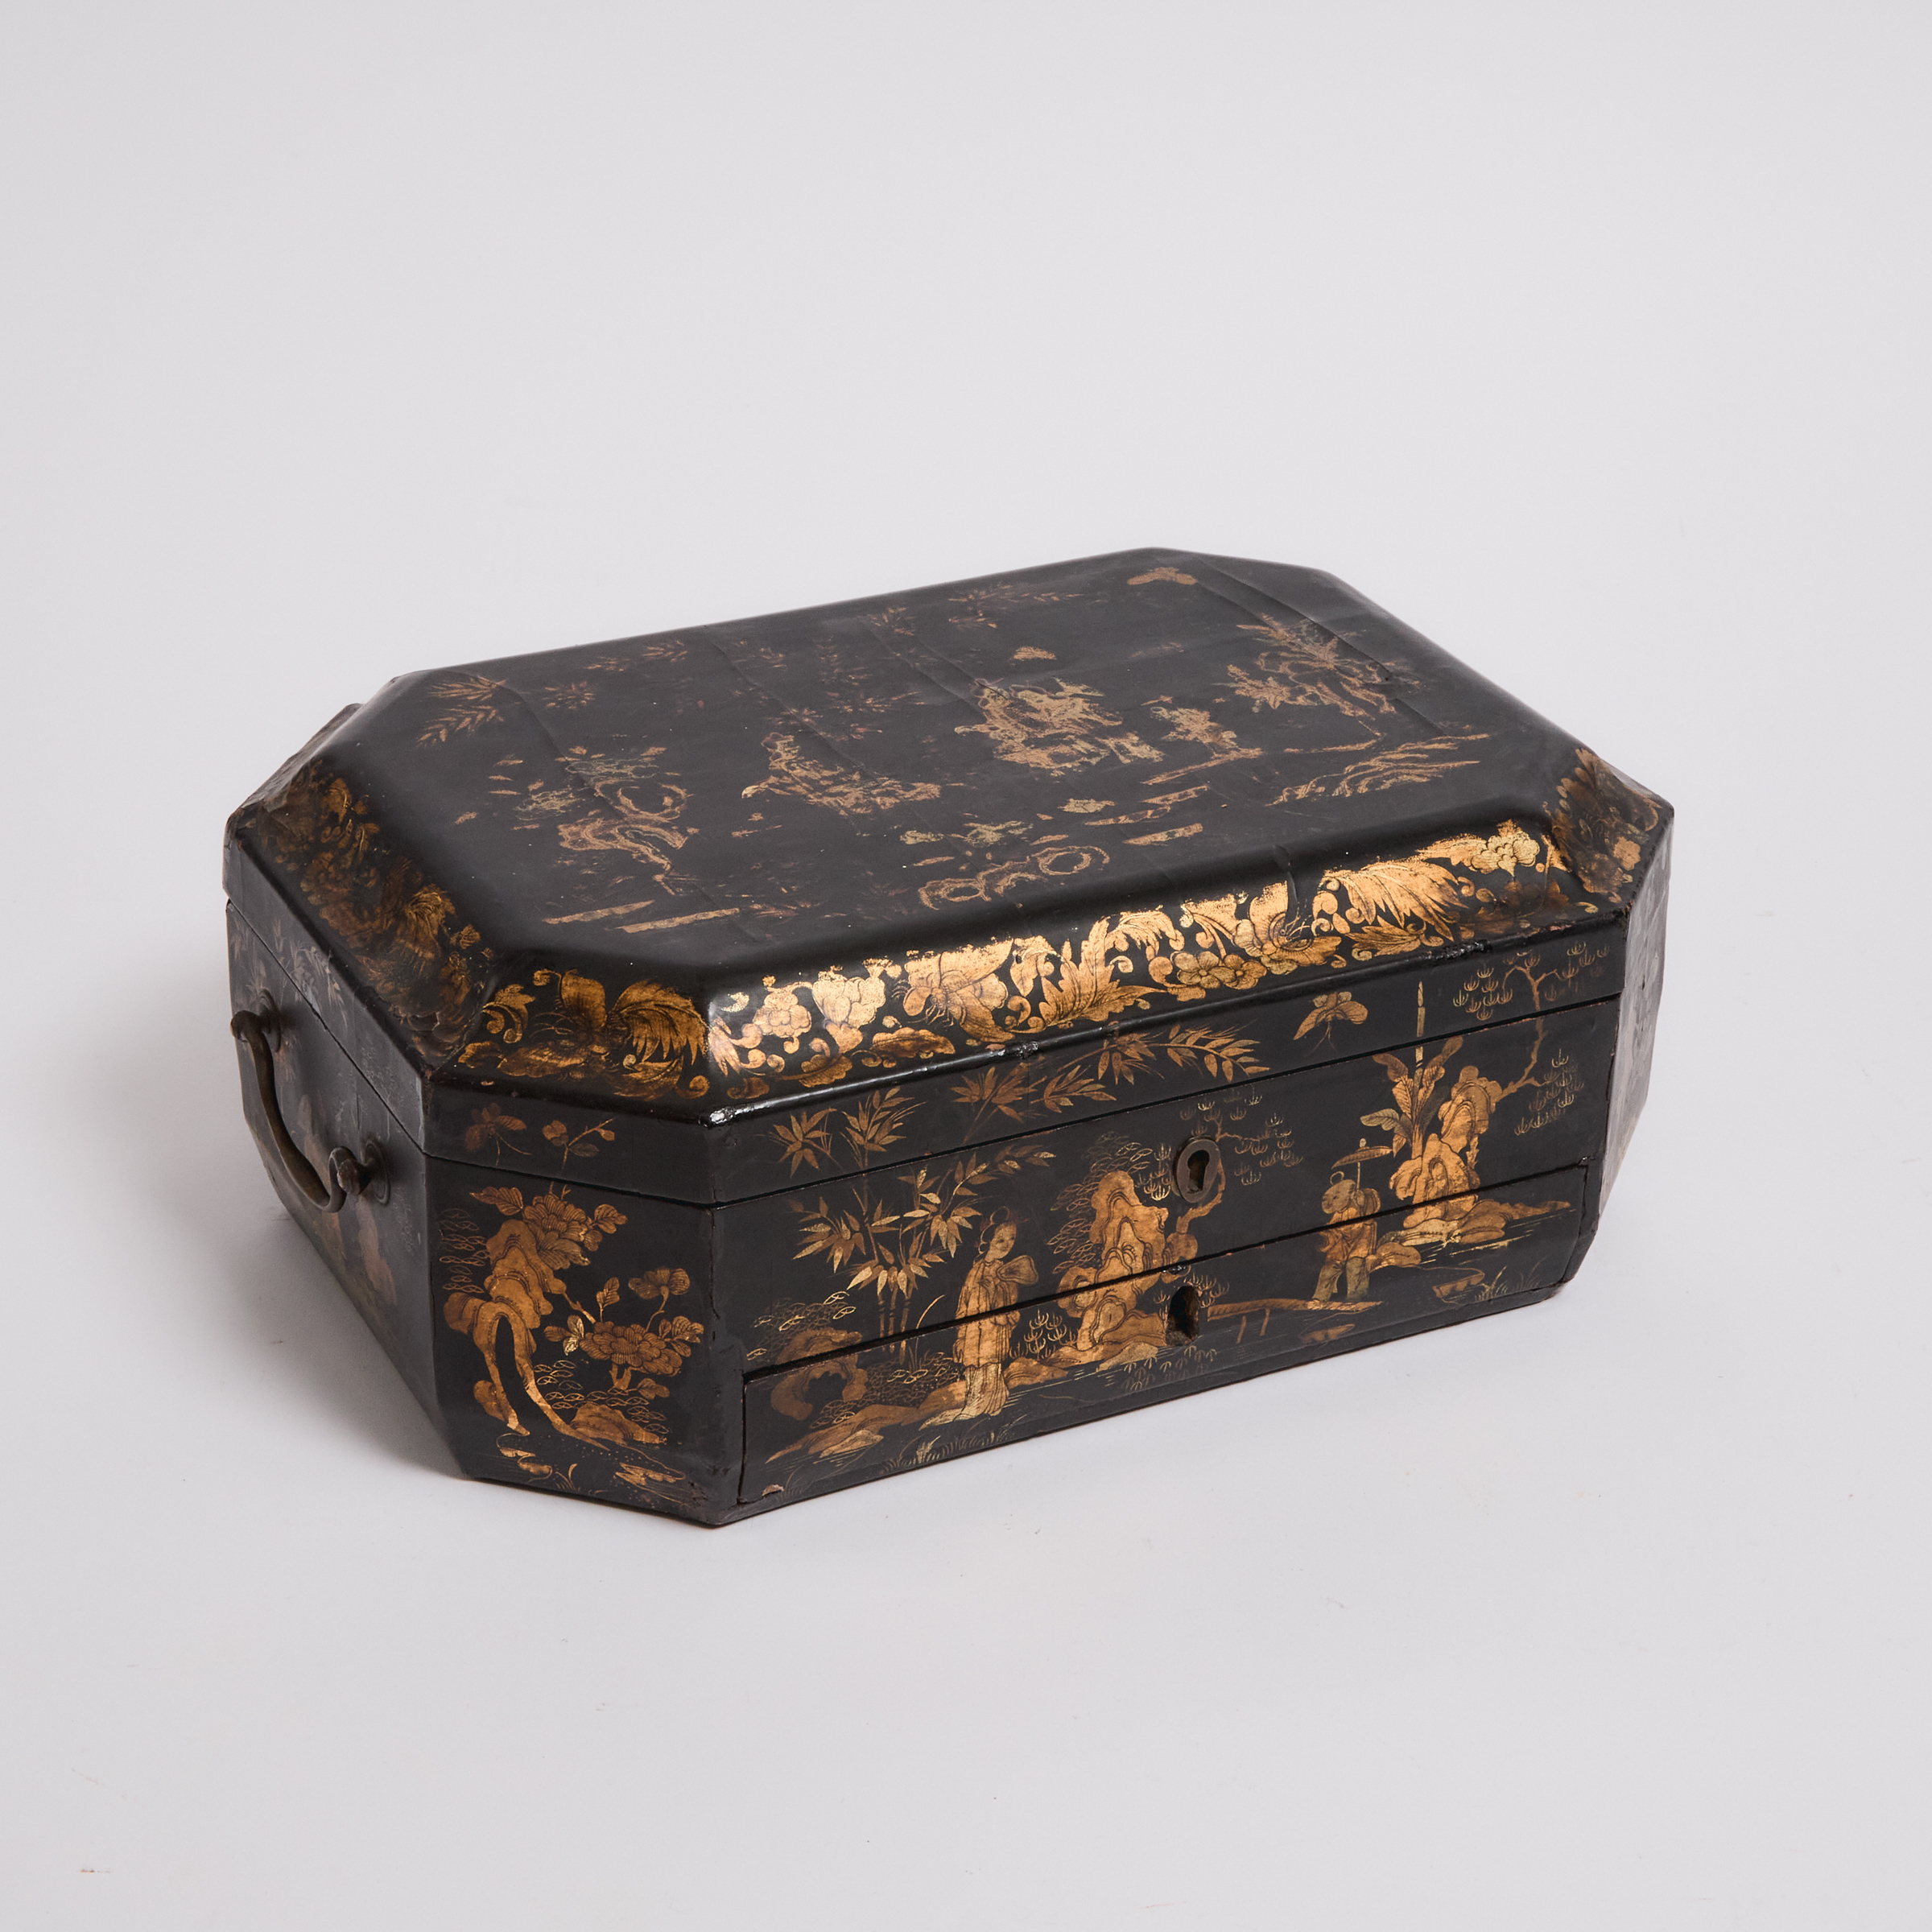 A Large Chinese Export Gilt Lacquered